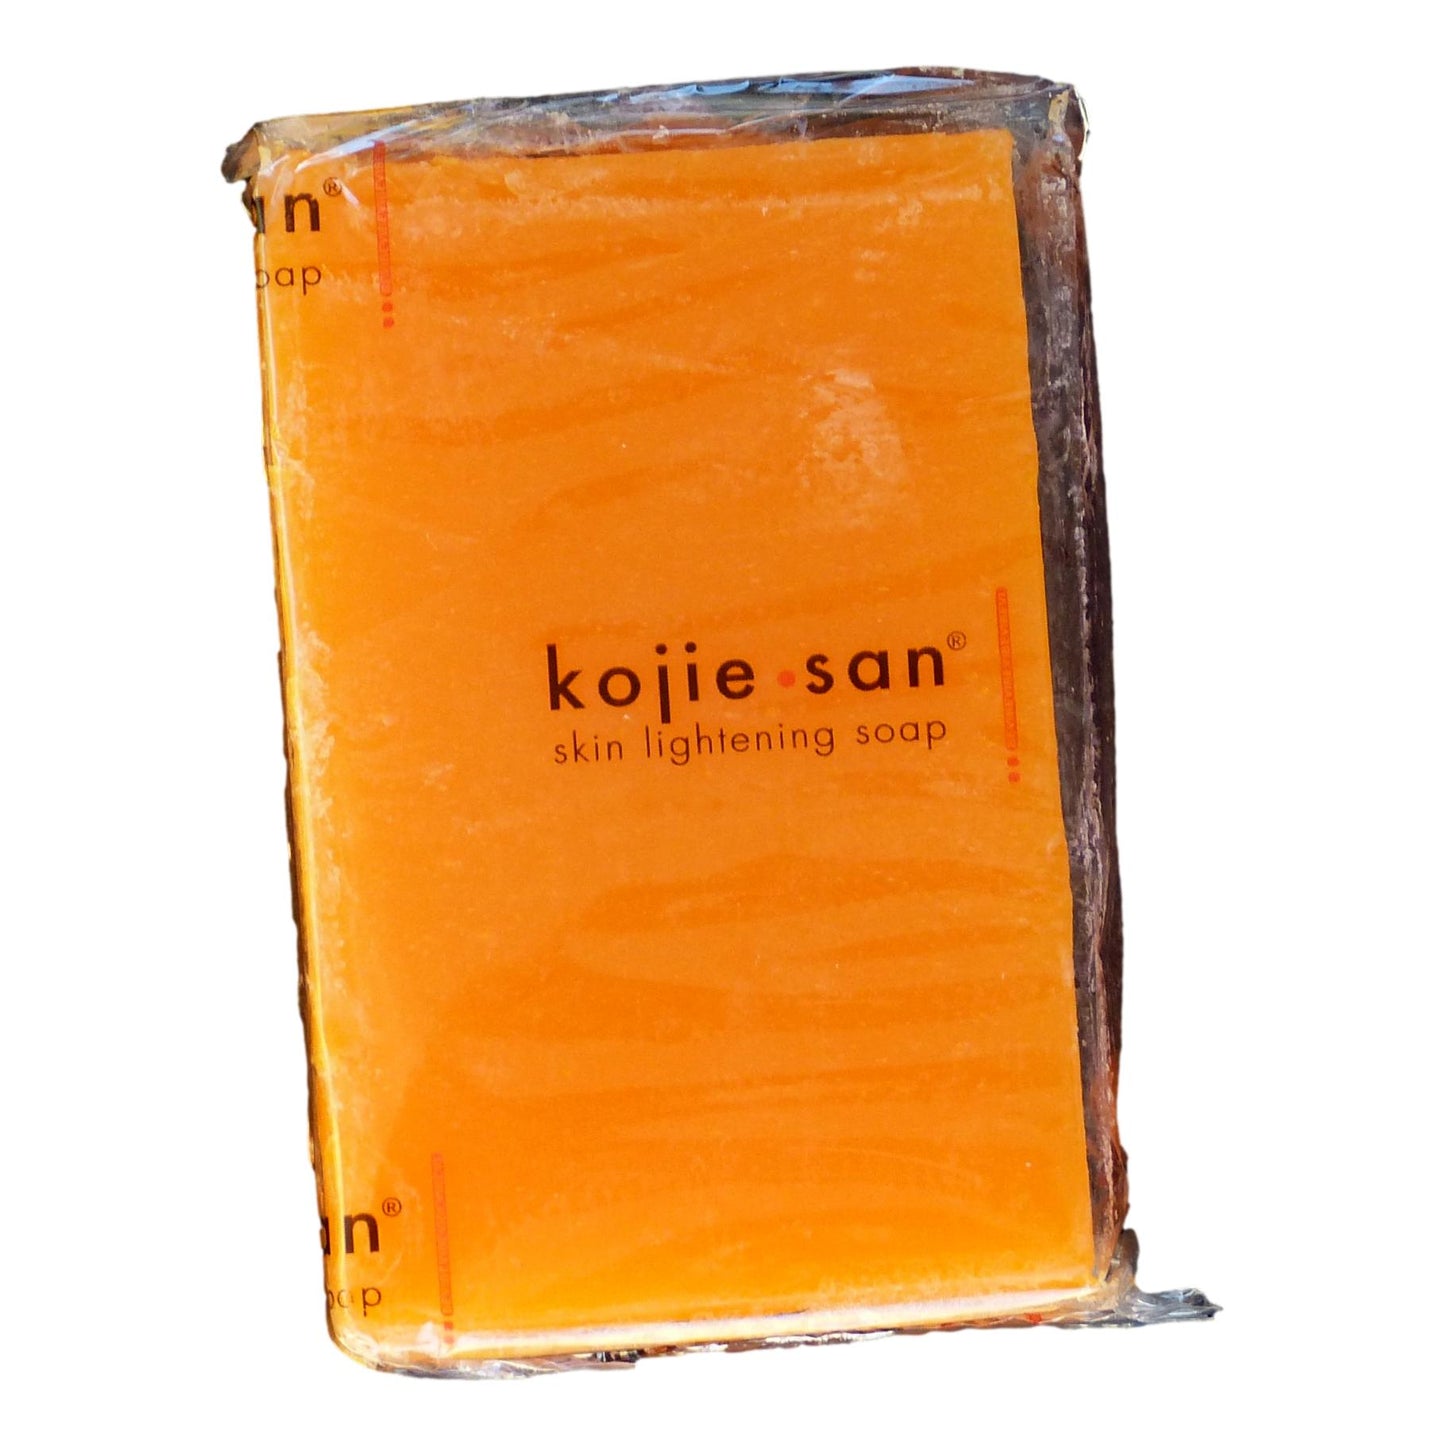 Kojie San Skin Lightening Soap Classic 65g Pack of 4 - Asian Beauty Supply